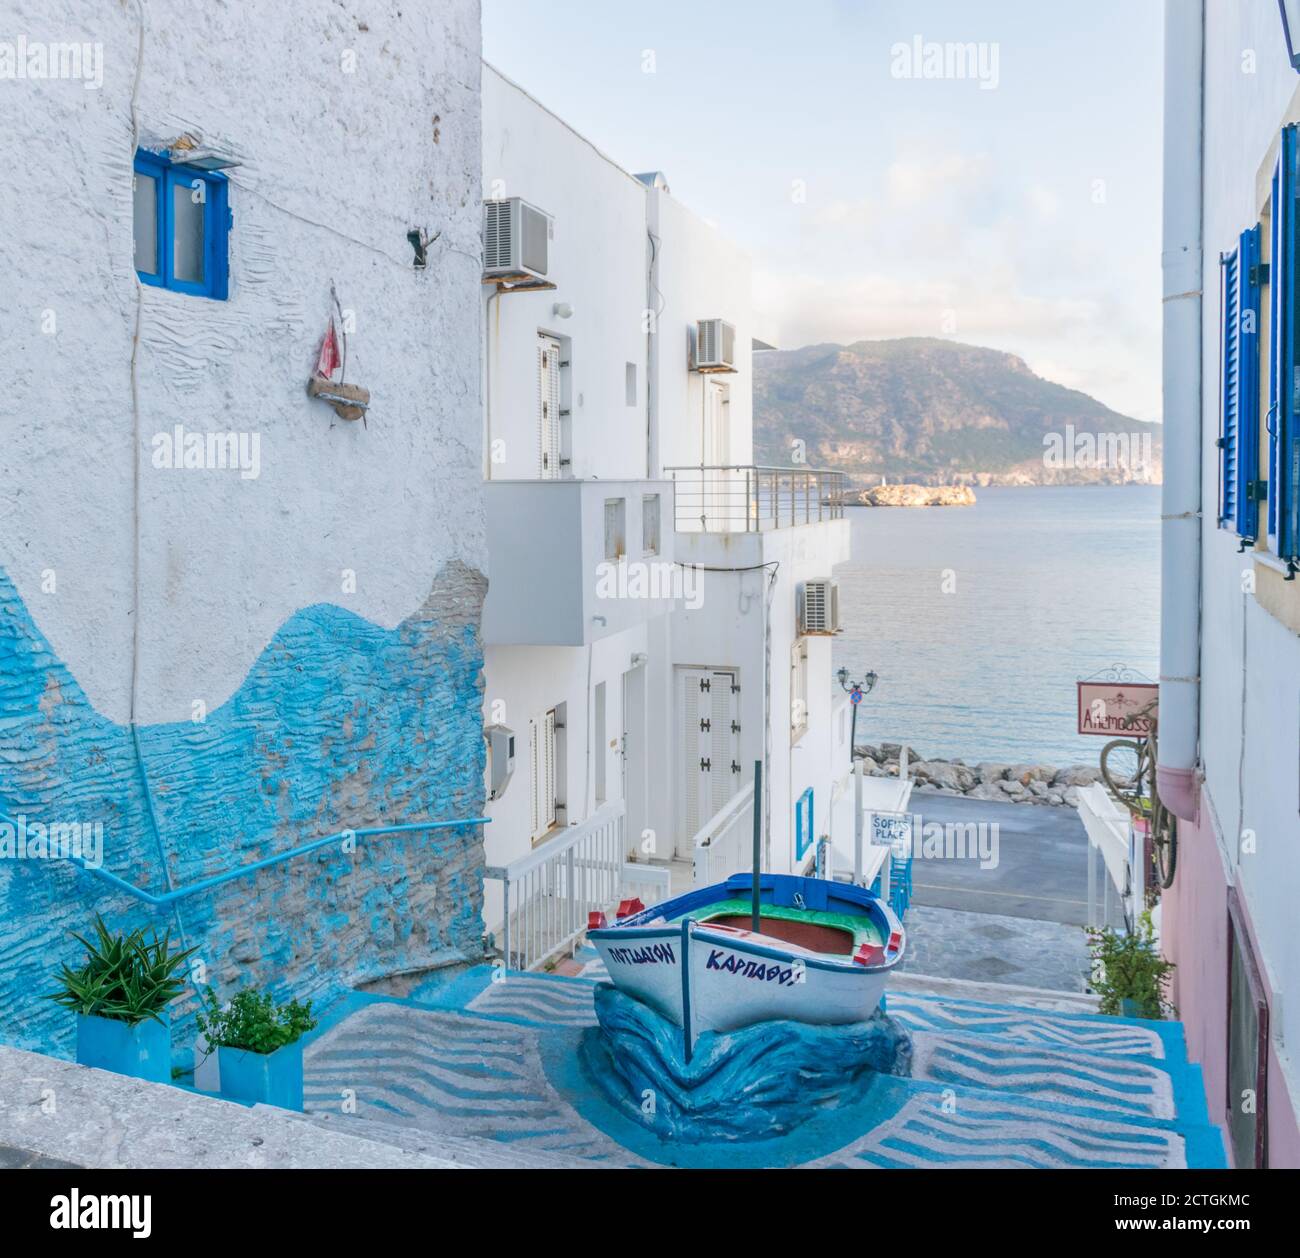 Pigadia, Karpathos, Greece - October 4, 2019: Popular tourist photo spot in Pigadia town with colored stairway alley and boat in the middle, morning Stock Photo